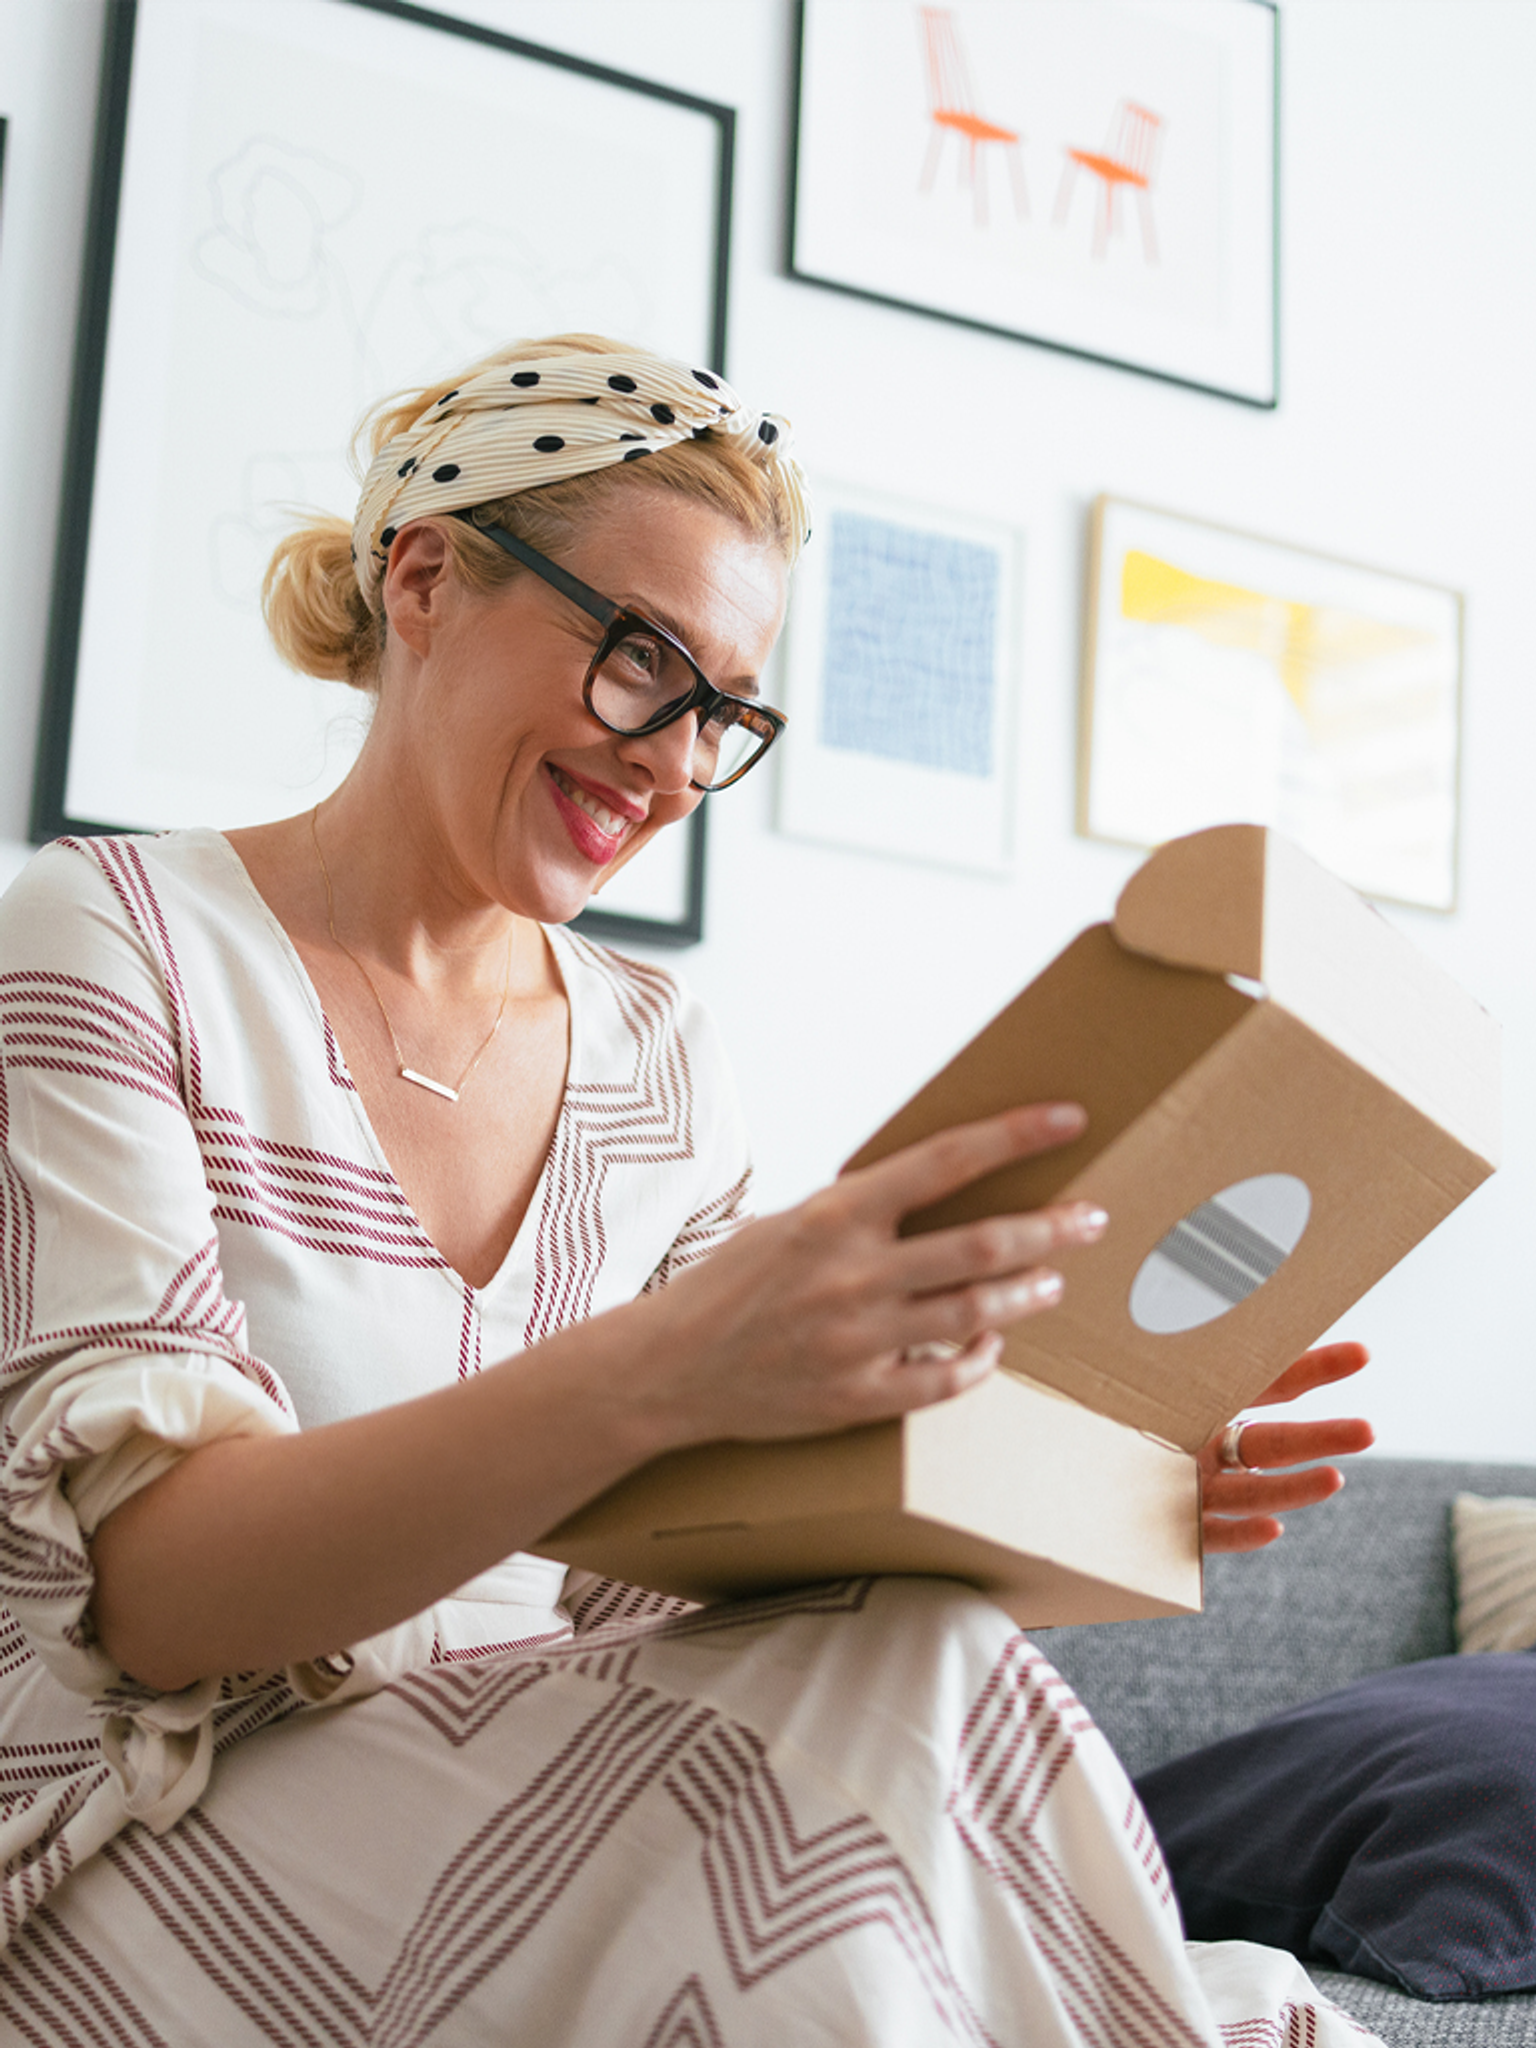 Smiling woman with glasses opens a package at home.